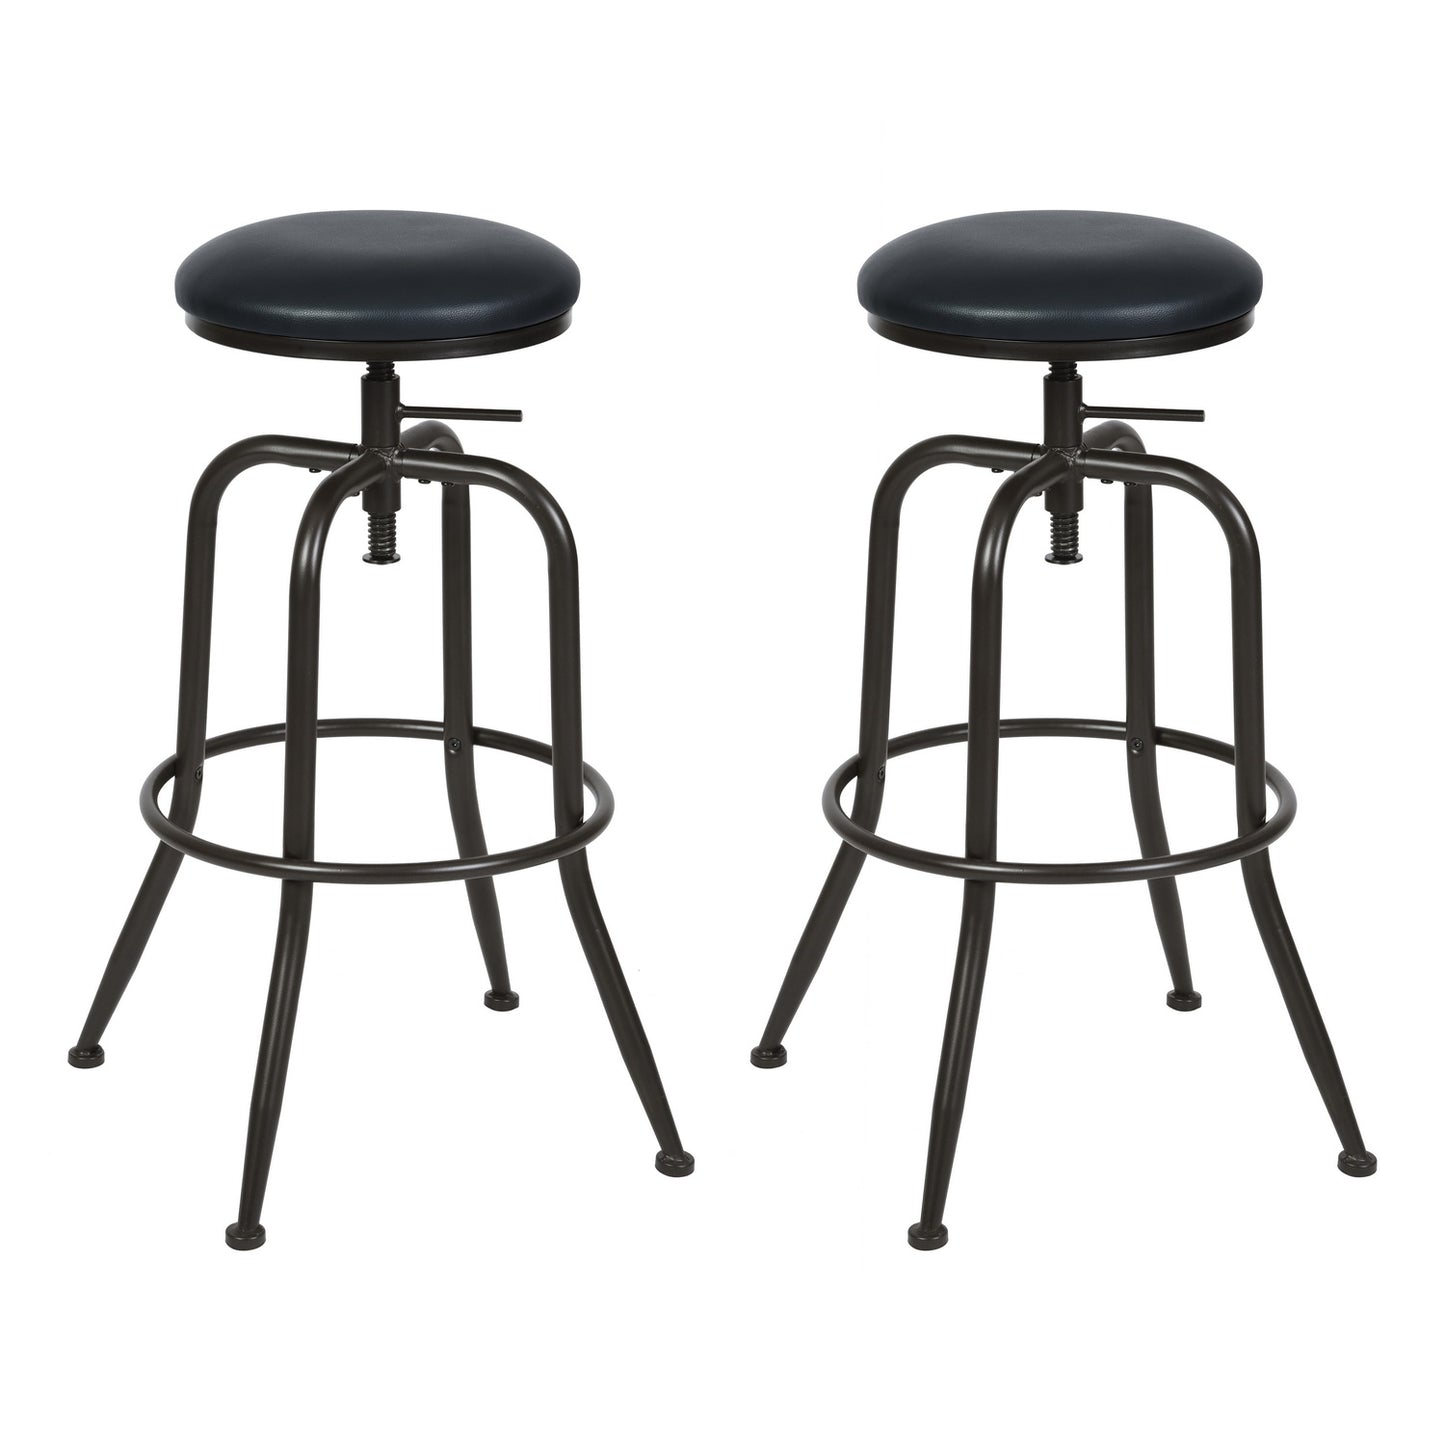 Set Of Two 30" Brown And Black Steel Swivel Backless Bar Chairs With Footrest By Homeroots